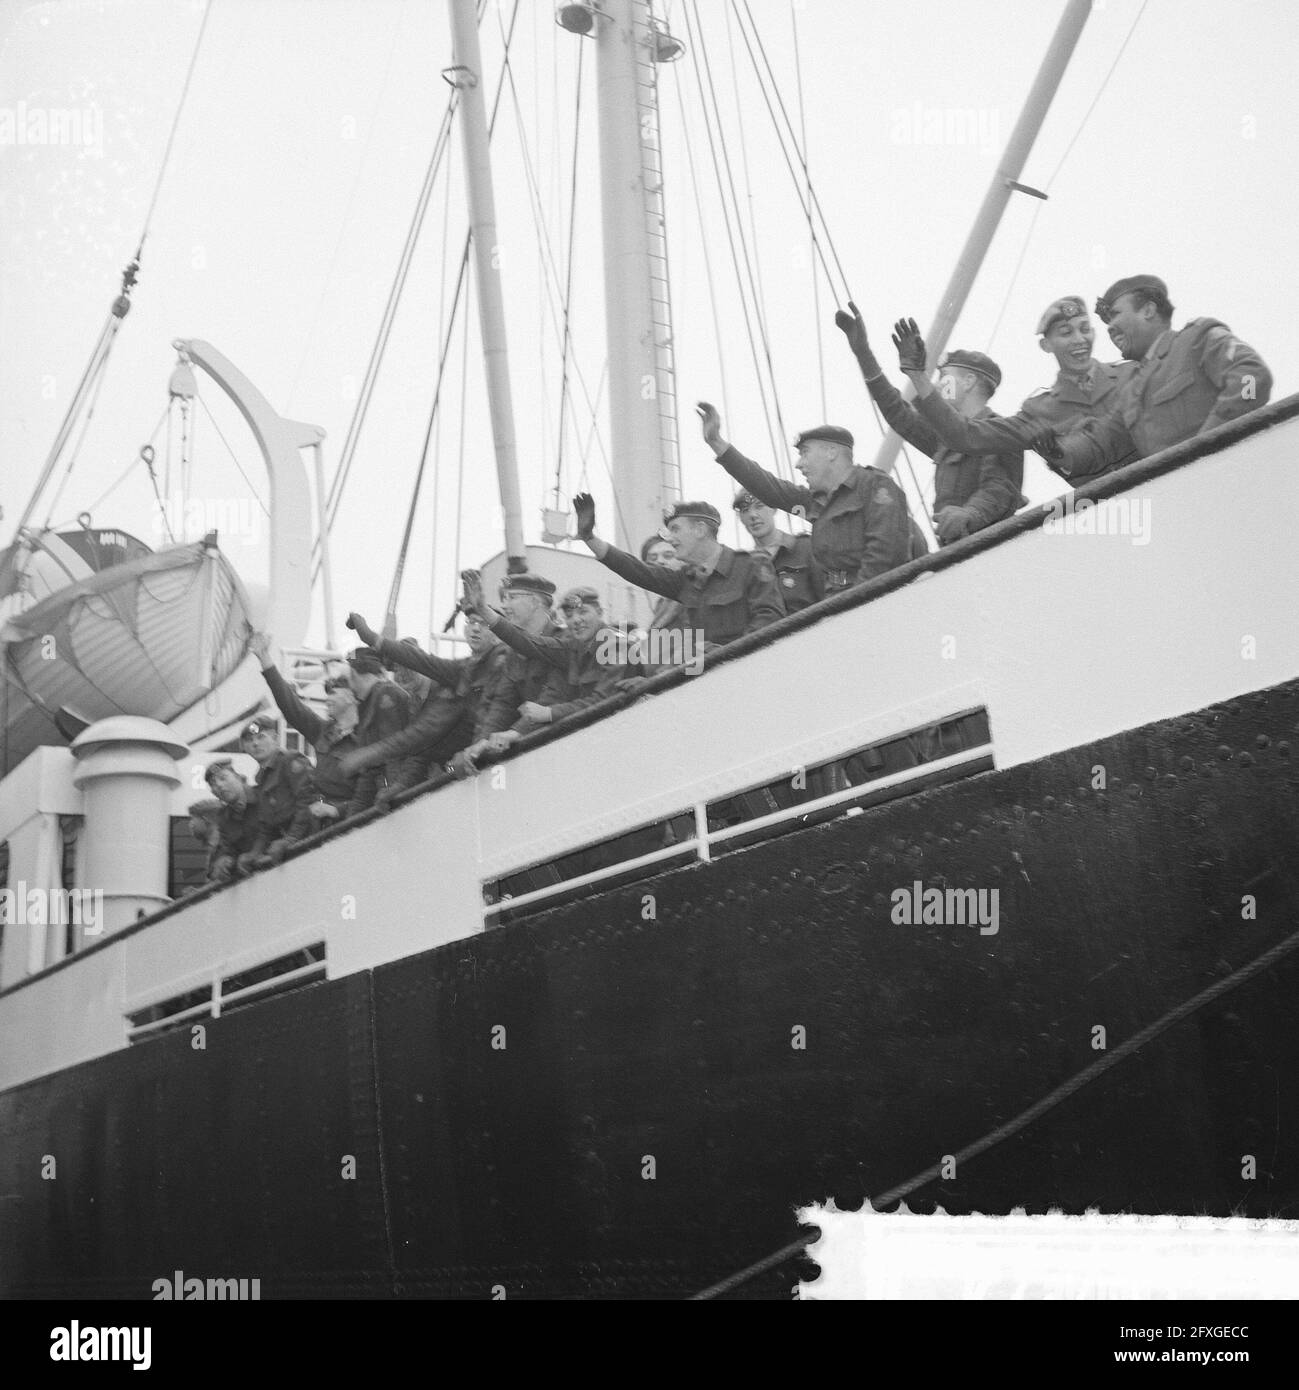 Departure first detachment of the first Suriname Company by Ms. Willemstad to Suriname, soldiers wave goodbye, January 13, 1961, FAREFARE, COMPAGNIES, DETACHMENTS, SOLDATES, The Netherlands, 20th century press agency photo, news to remember, documentary, historic photography 1945-1990, visual stories, human history of the Twentieth Century, capturing moments in time Stock Photo